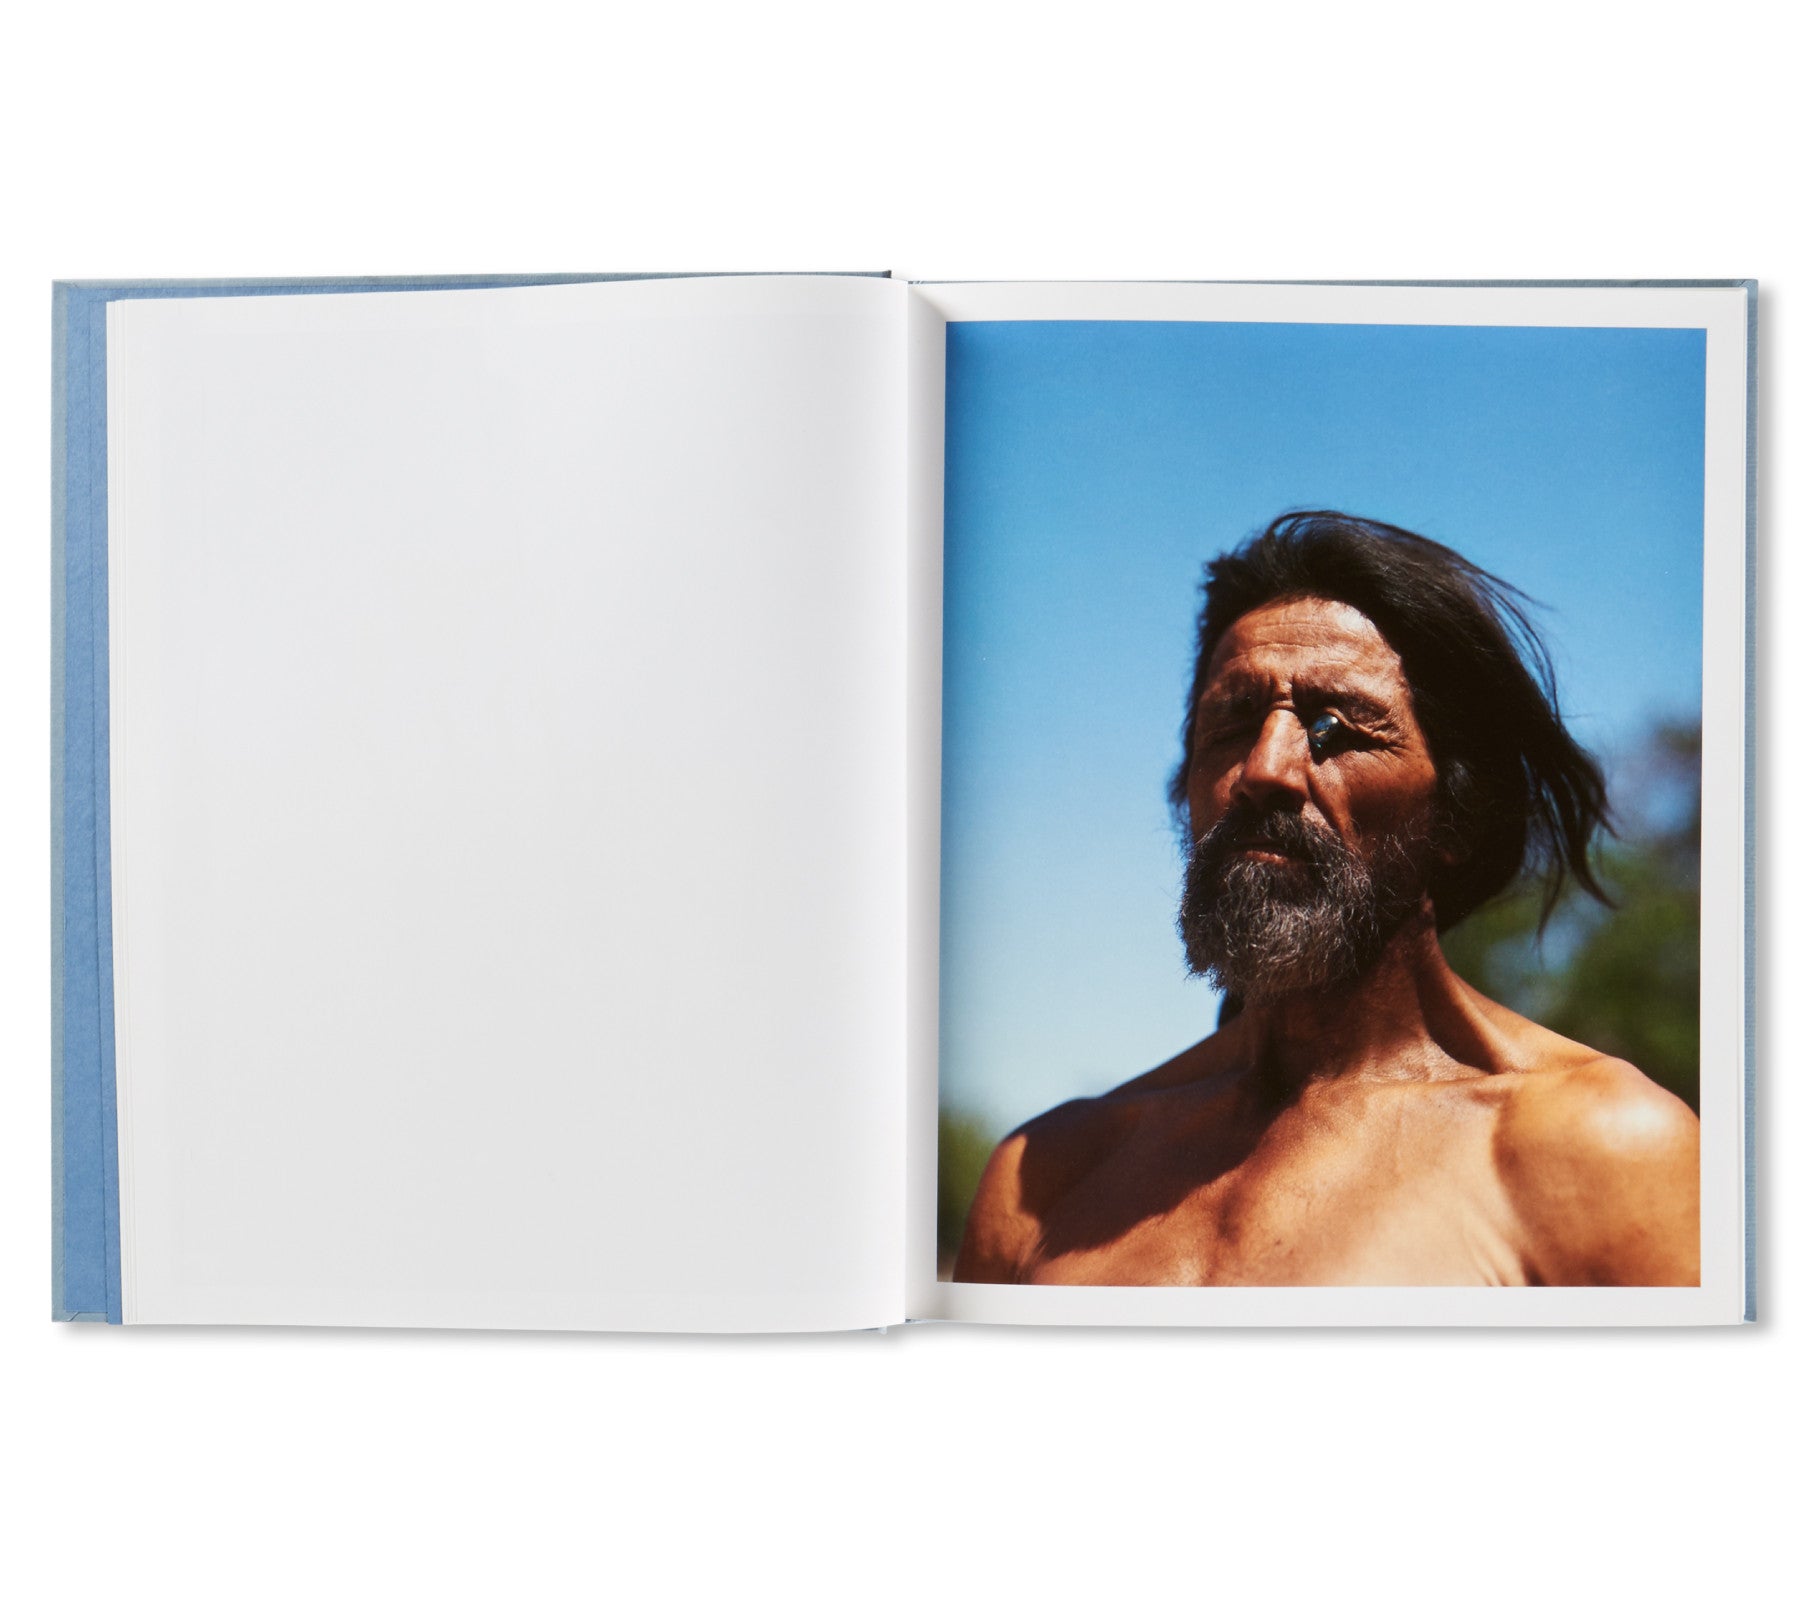 ZZYZX by Gregory Halpern [FIRST EDITION, FOURTH PRINTING / SIGNED]